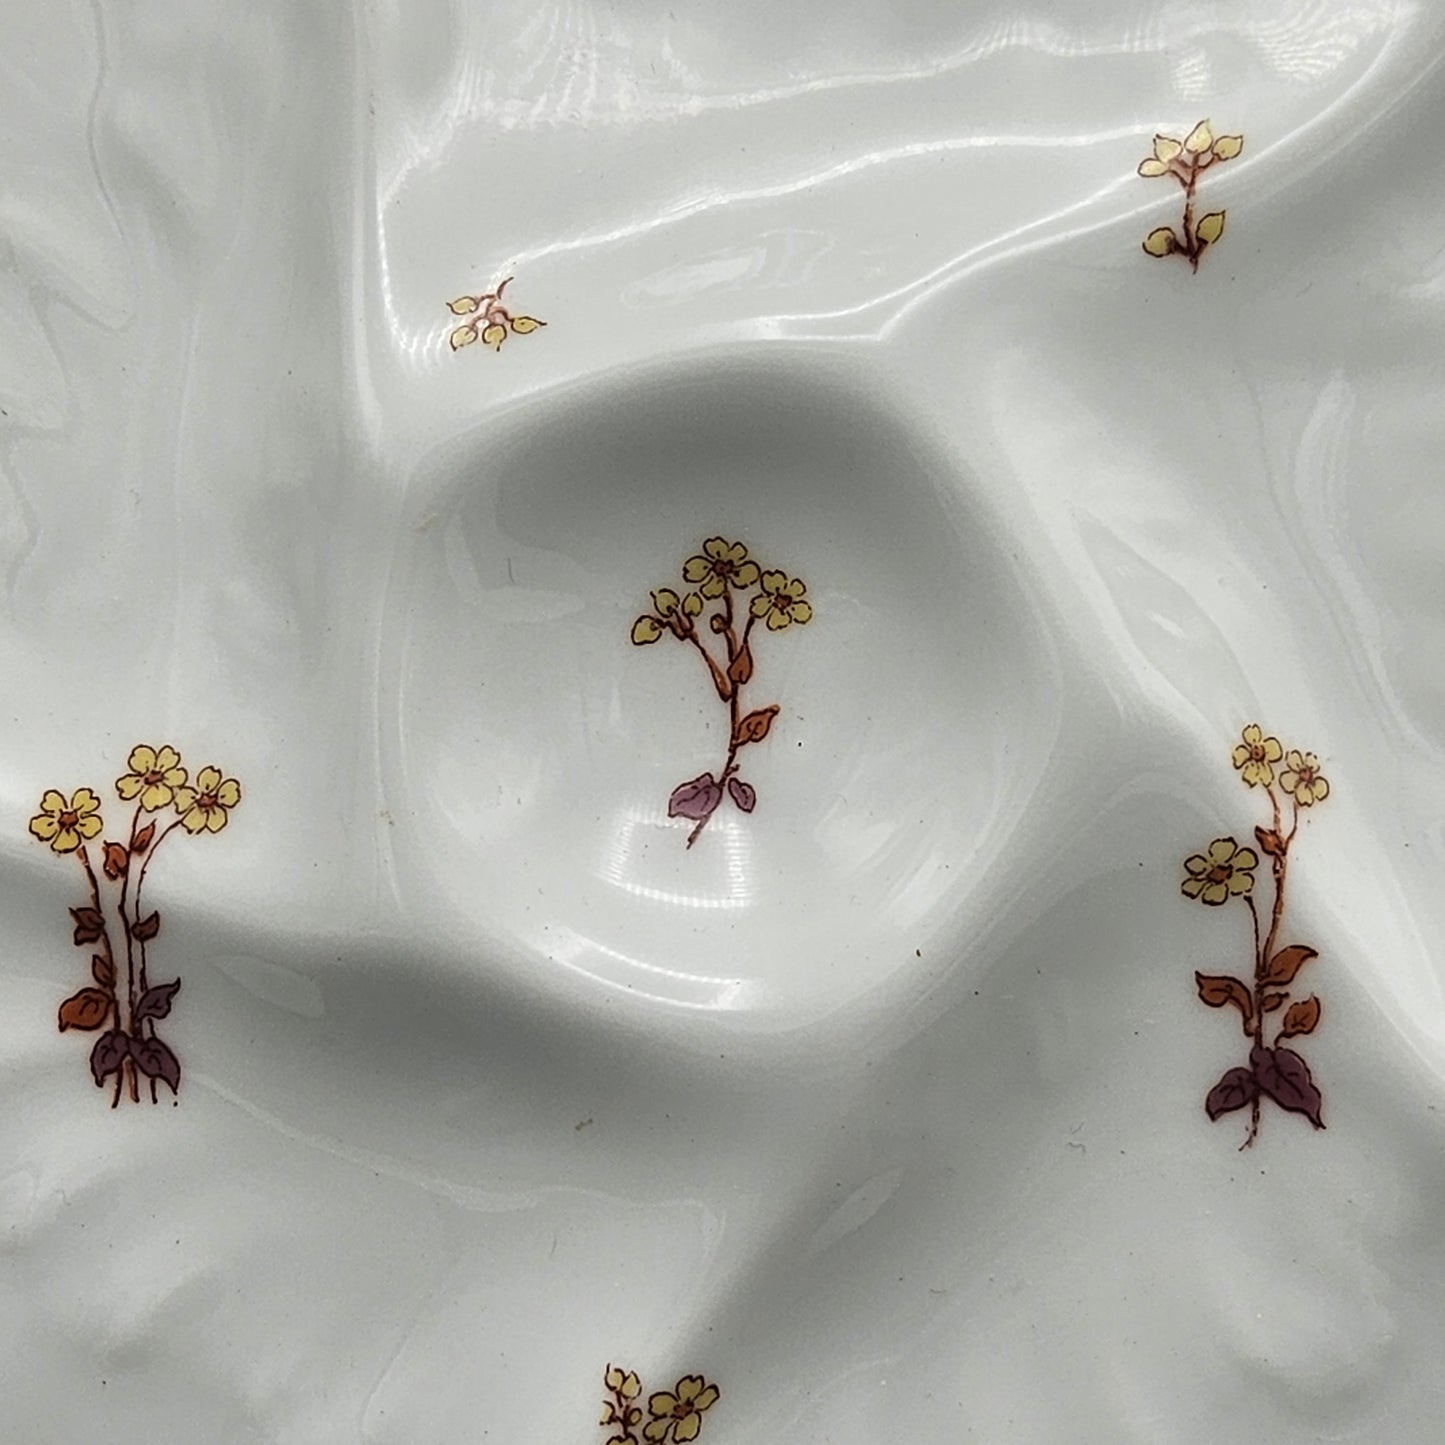 Charles Haviland Limoges Porcelain Oyster Plate with Small Flowers